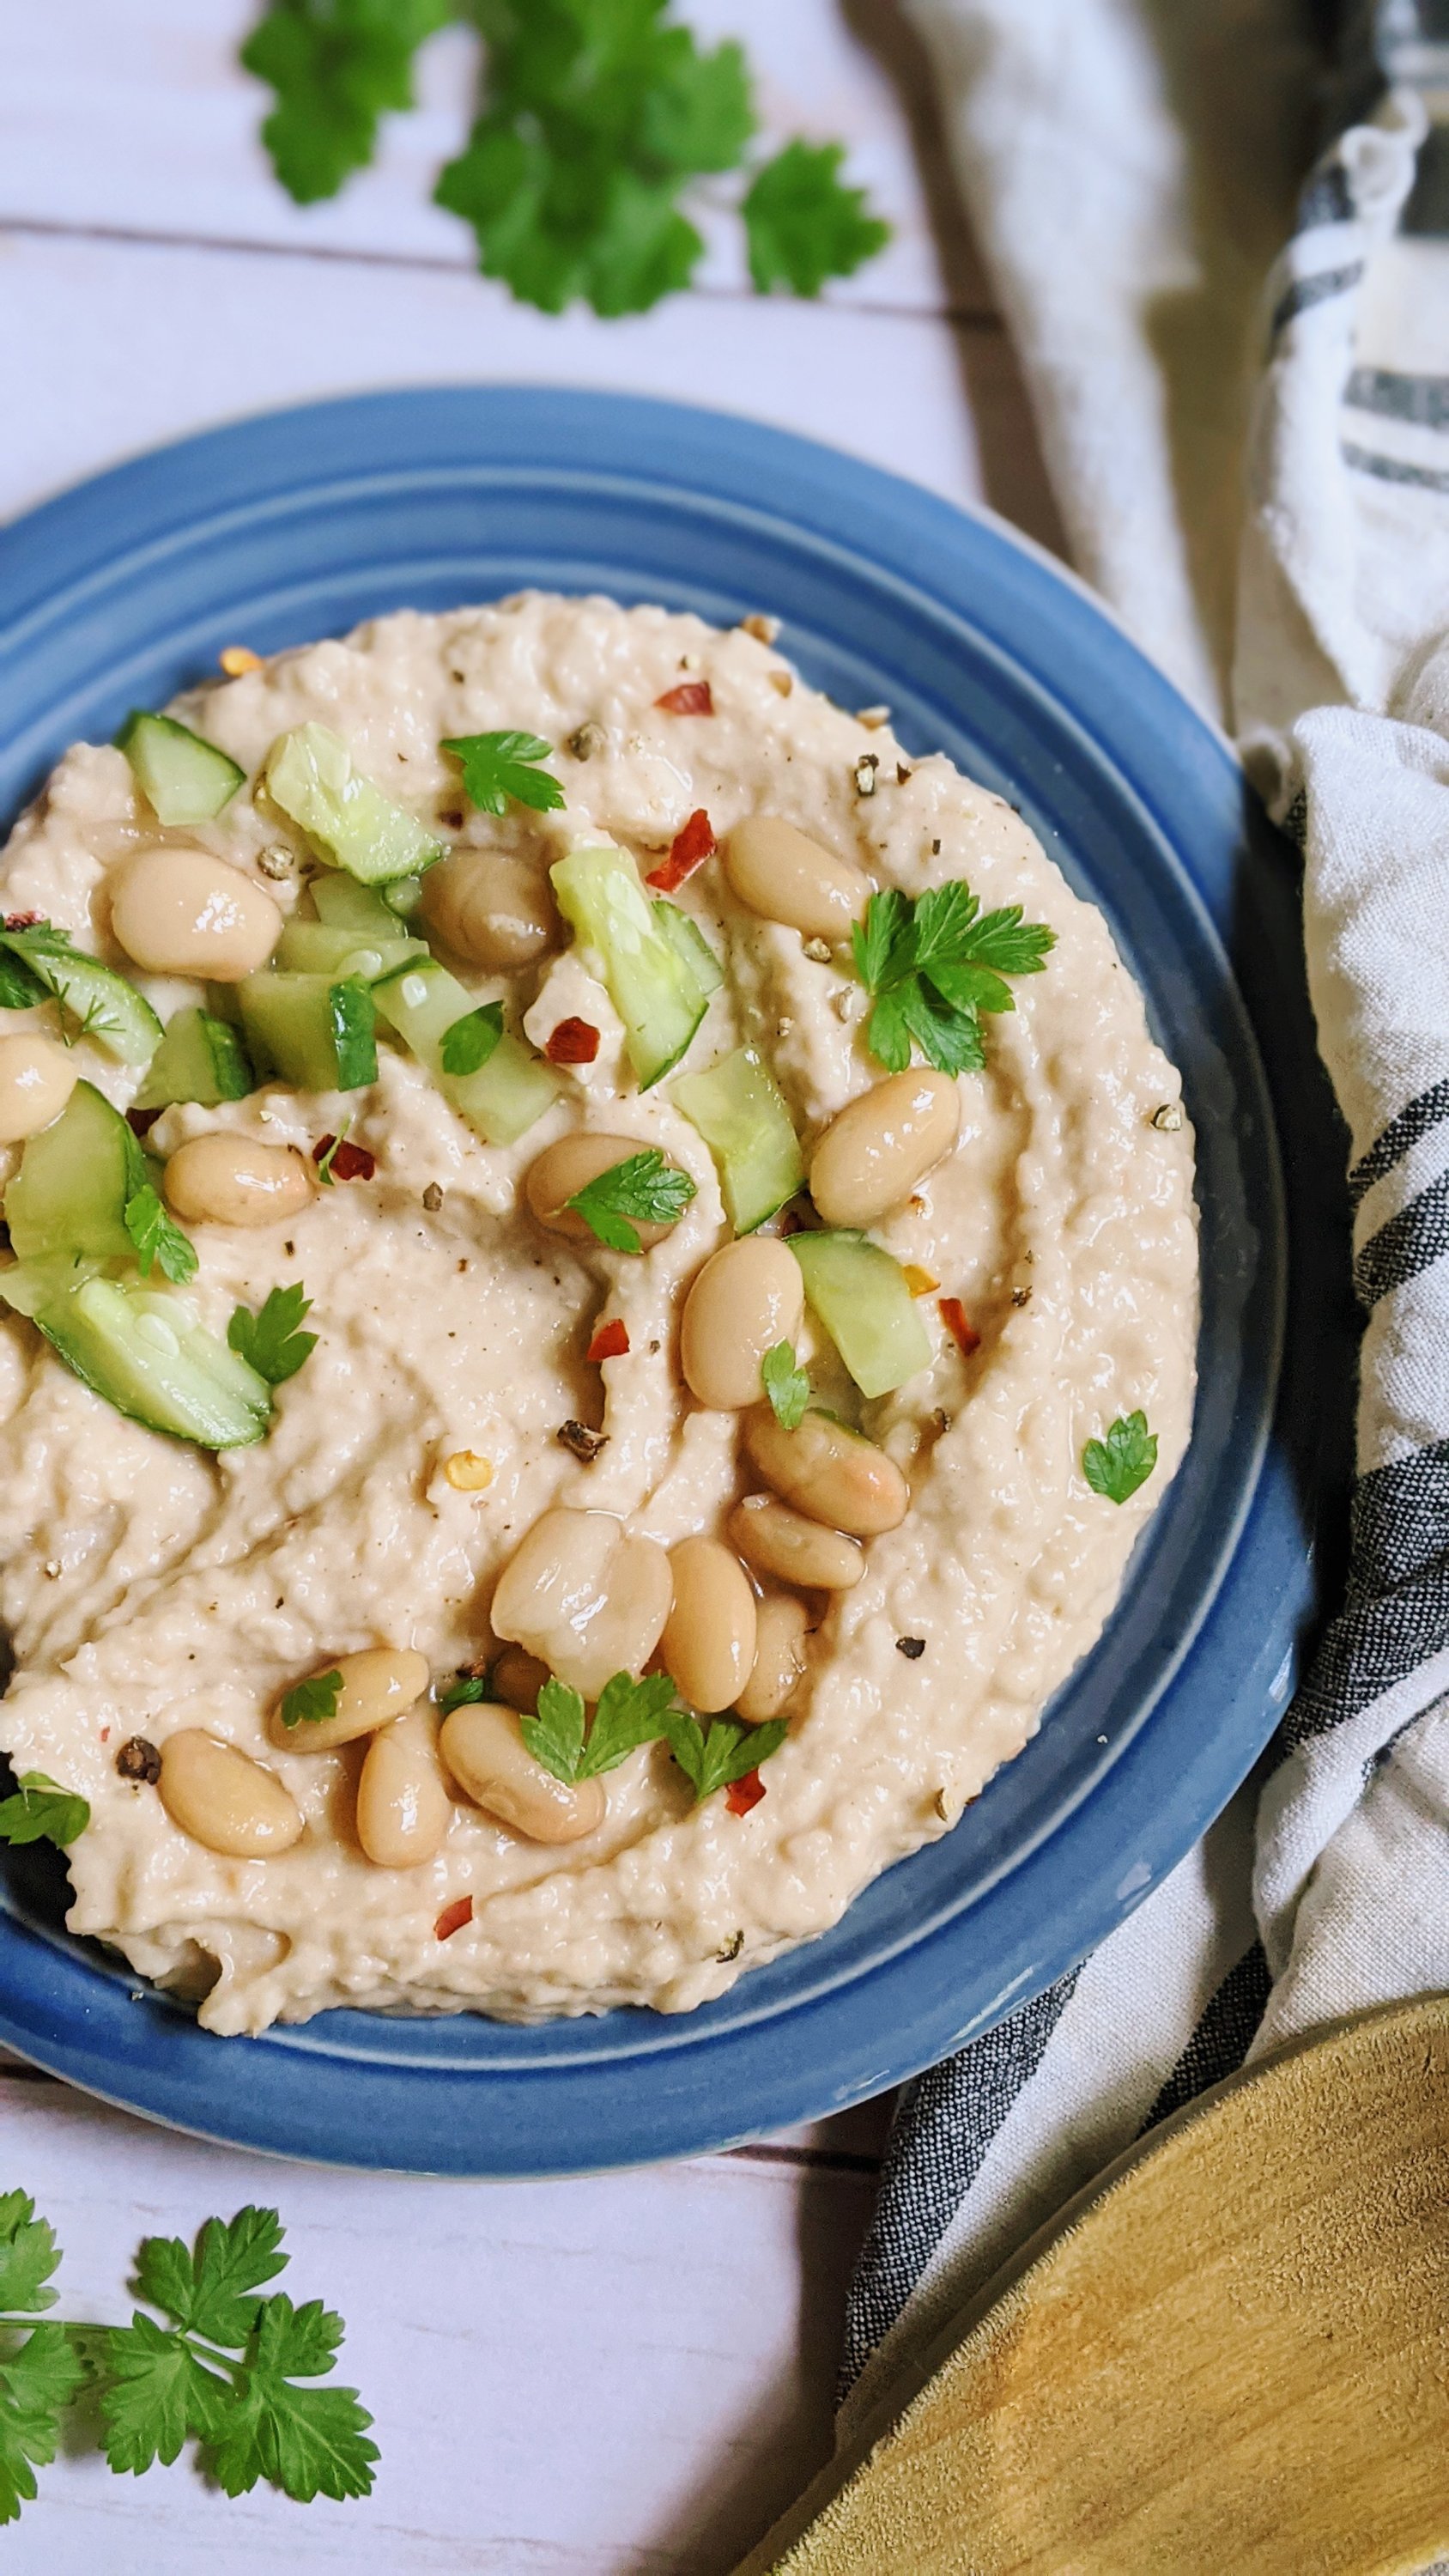 creamy hummus without oil hummus without chickpeas no garbanzo bean hummus with navy beans or cannellini beans instead of chickpeas can i make hummus without chickpeas no oil bean dip recipes